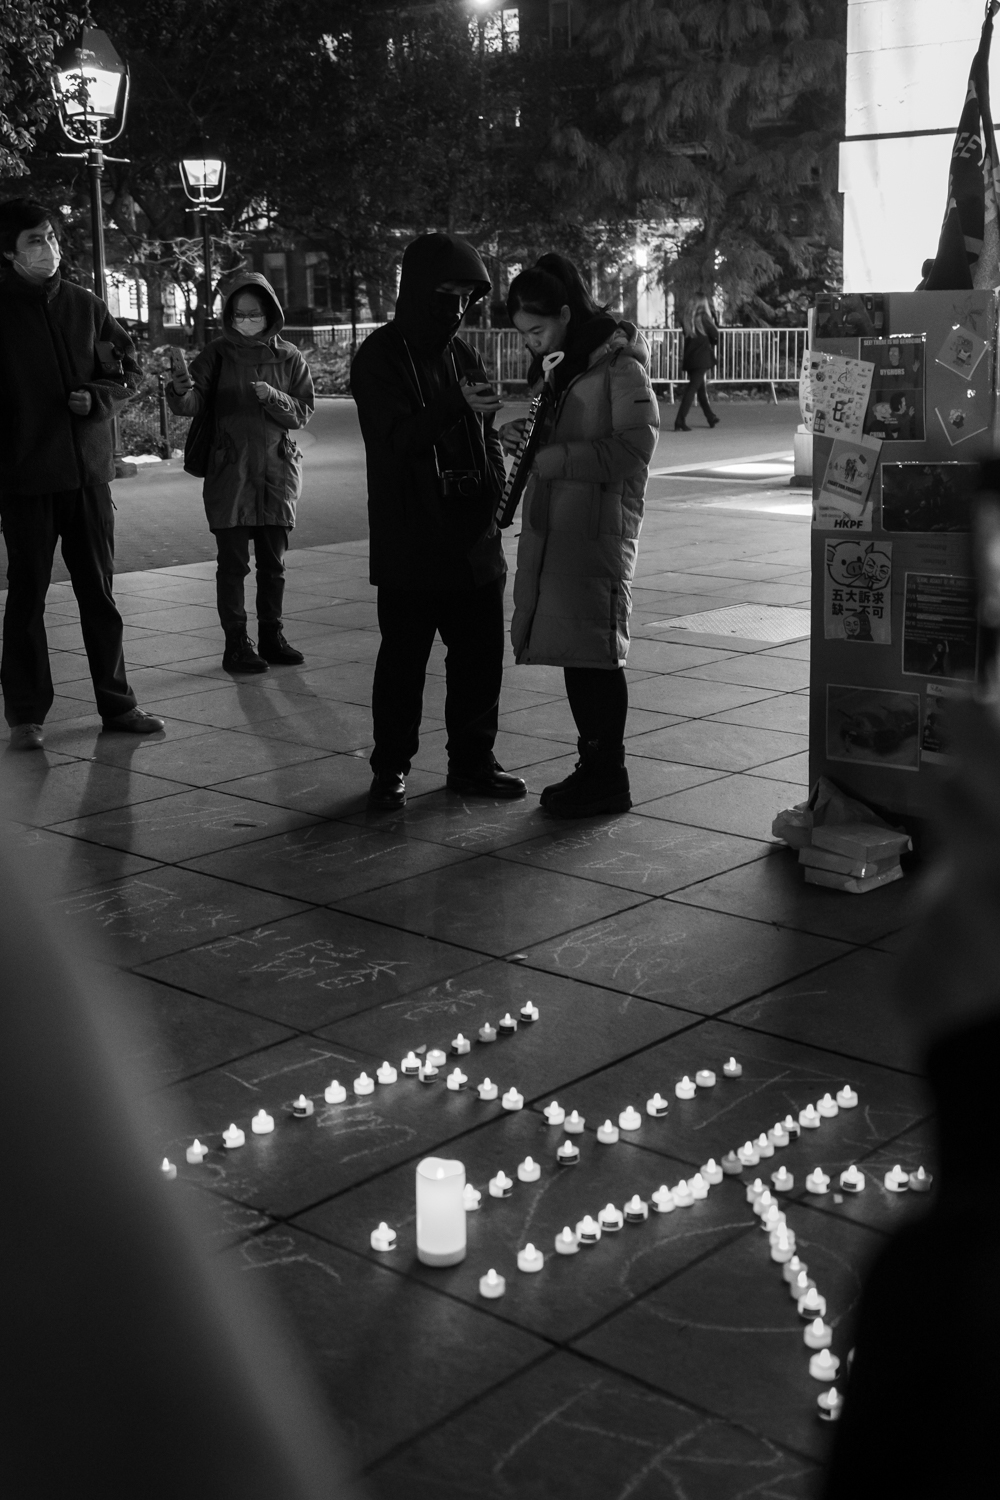 A female plays a melodica while looking at a phone held by another person wearing a hoodie and a black mask. Next to them is a column made of cardboard, with posters hung on it. In front of them are the letters “H.K.” laid out with candle-shaped lights. The photo is black and white.